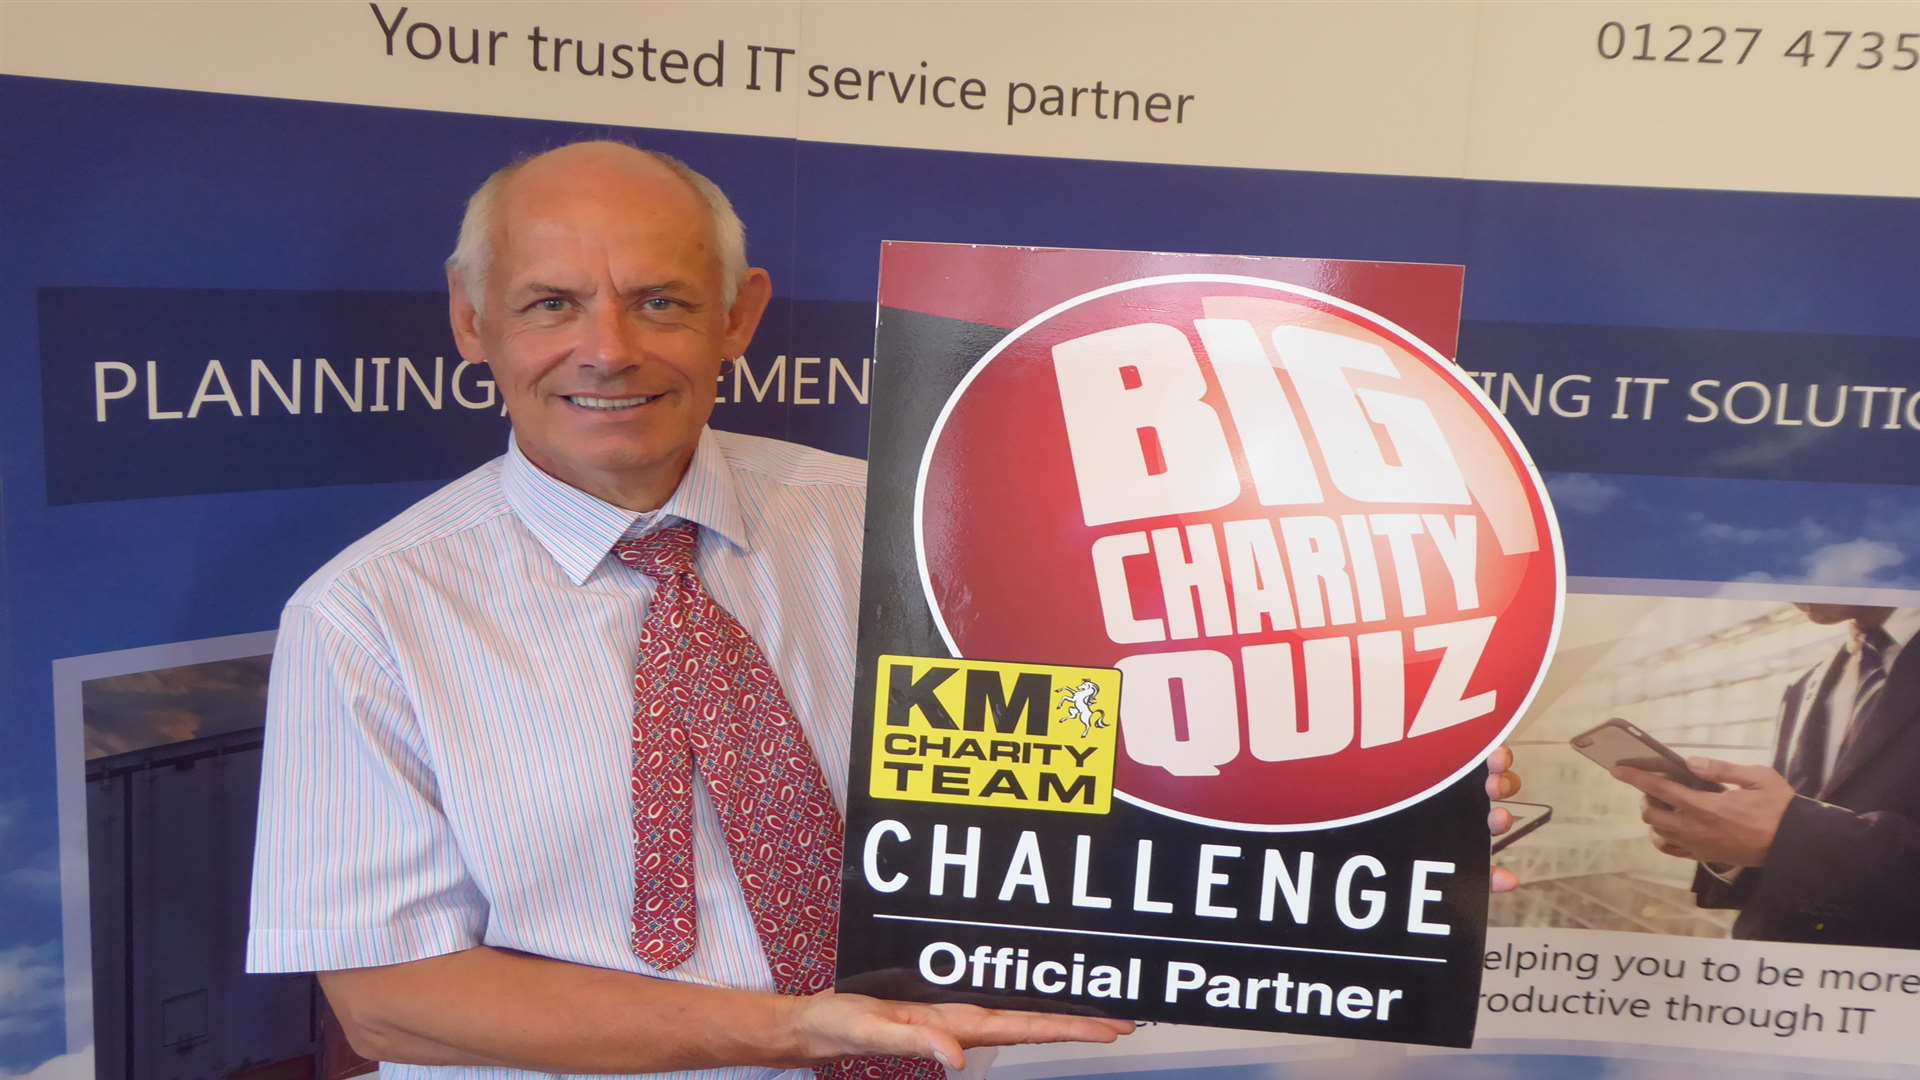 Adrian Bryant, managing director of ADM Computing, which is supporting the KM Big Charity Quiz.